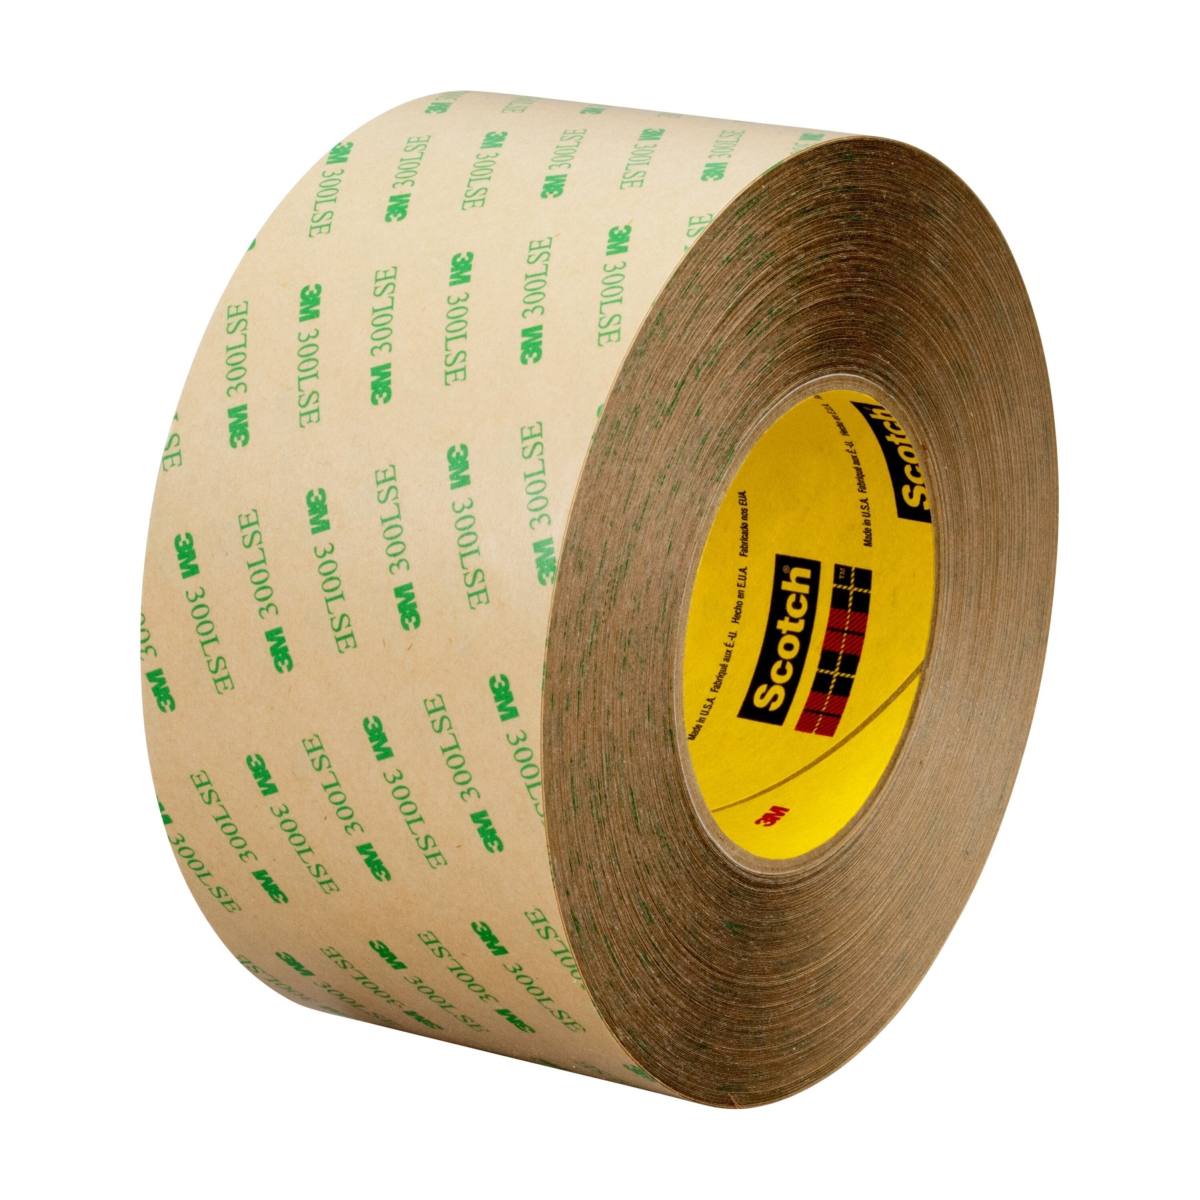 3M Dubbelzijdig plakband met polyester drager 93020LE, transparant, 14 mm x 55 m, 0,20 mm